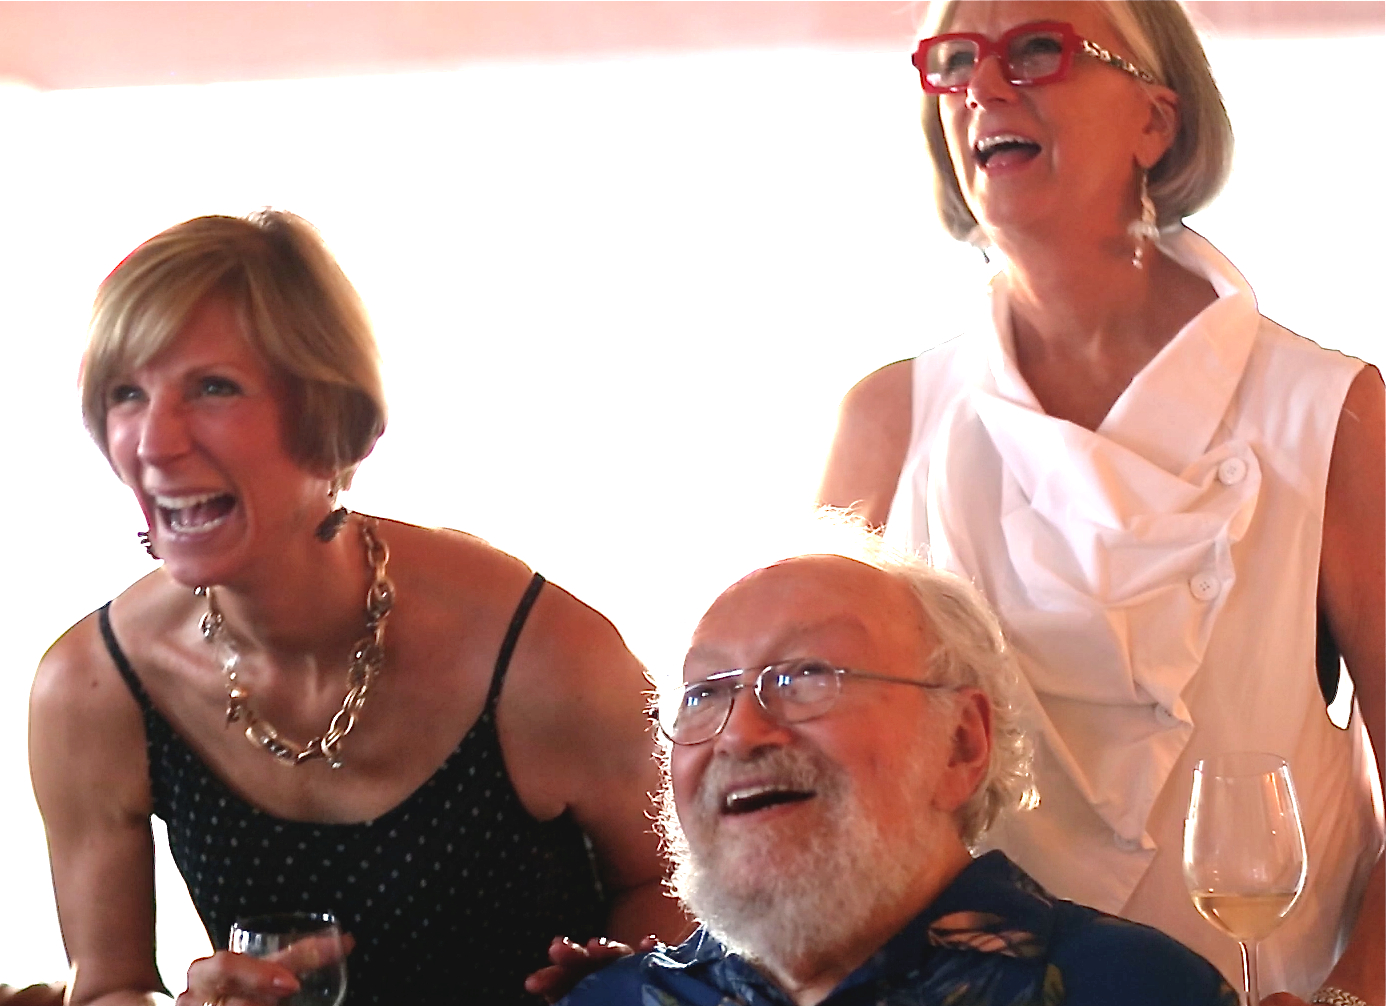 Harold enjoys the video with sisters-in-law Ruth Thompson from Carmel and Beth Black from Orlando